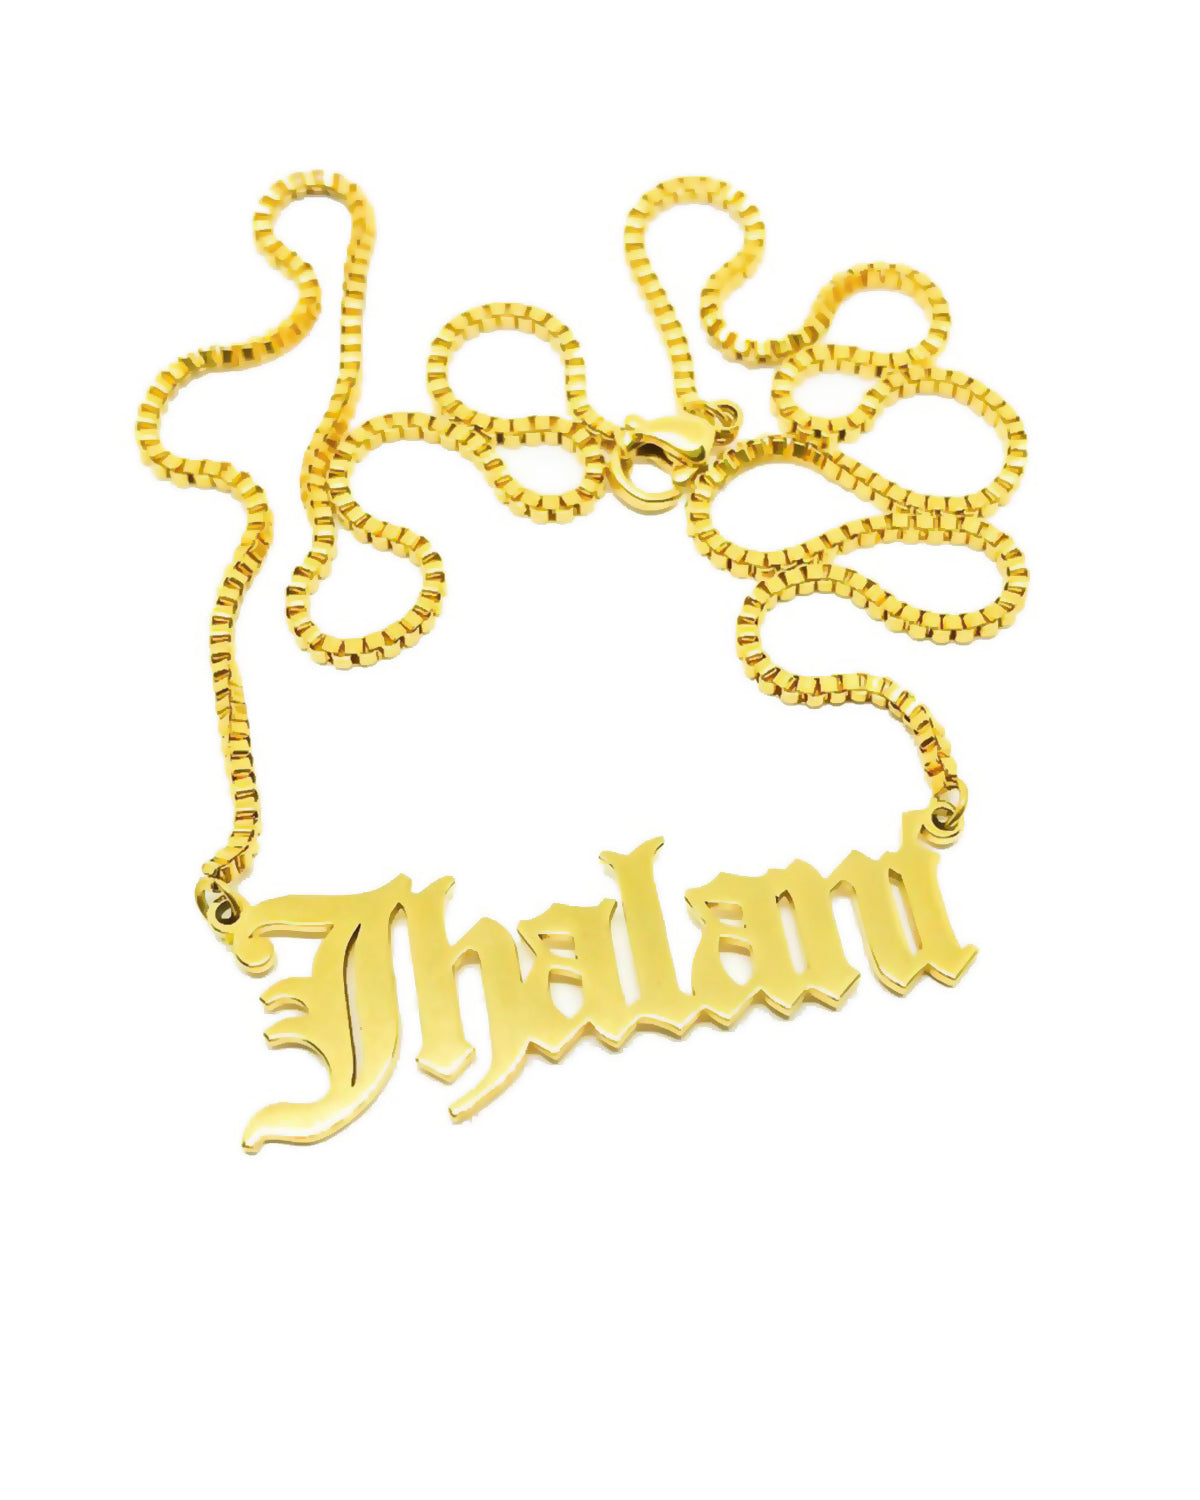 NAMEPLATE NECKLACE